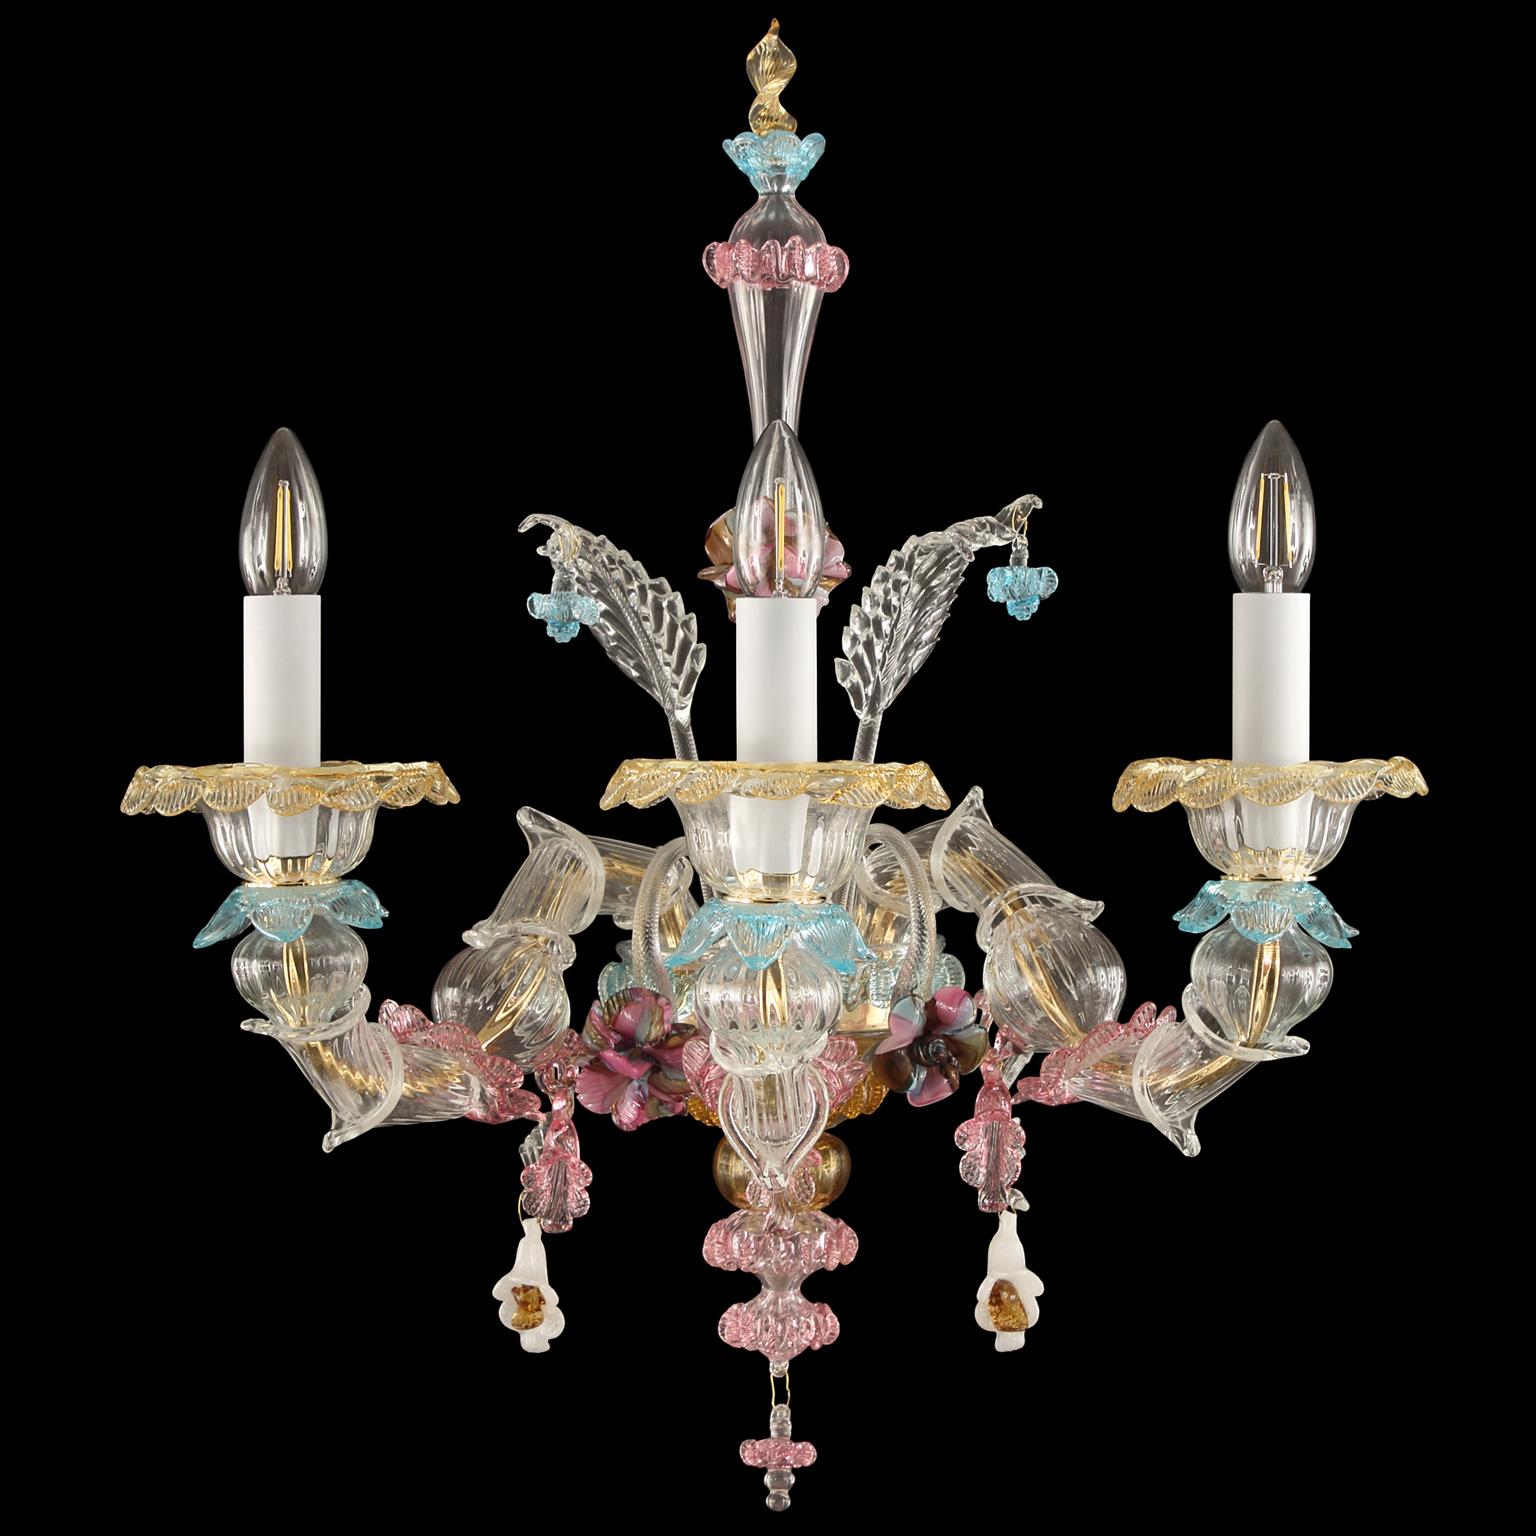 Toffee wall, 3 arms, rezzonico style crystal Murano glass, polychrome details by Multiforme

The Toffee collection is elegant and delicate thanks to the coloured details with pastel tones. The structure is a combination of well-proportioned volumes